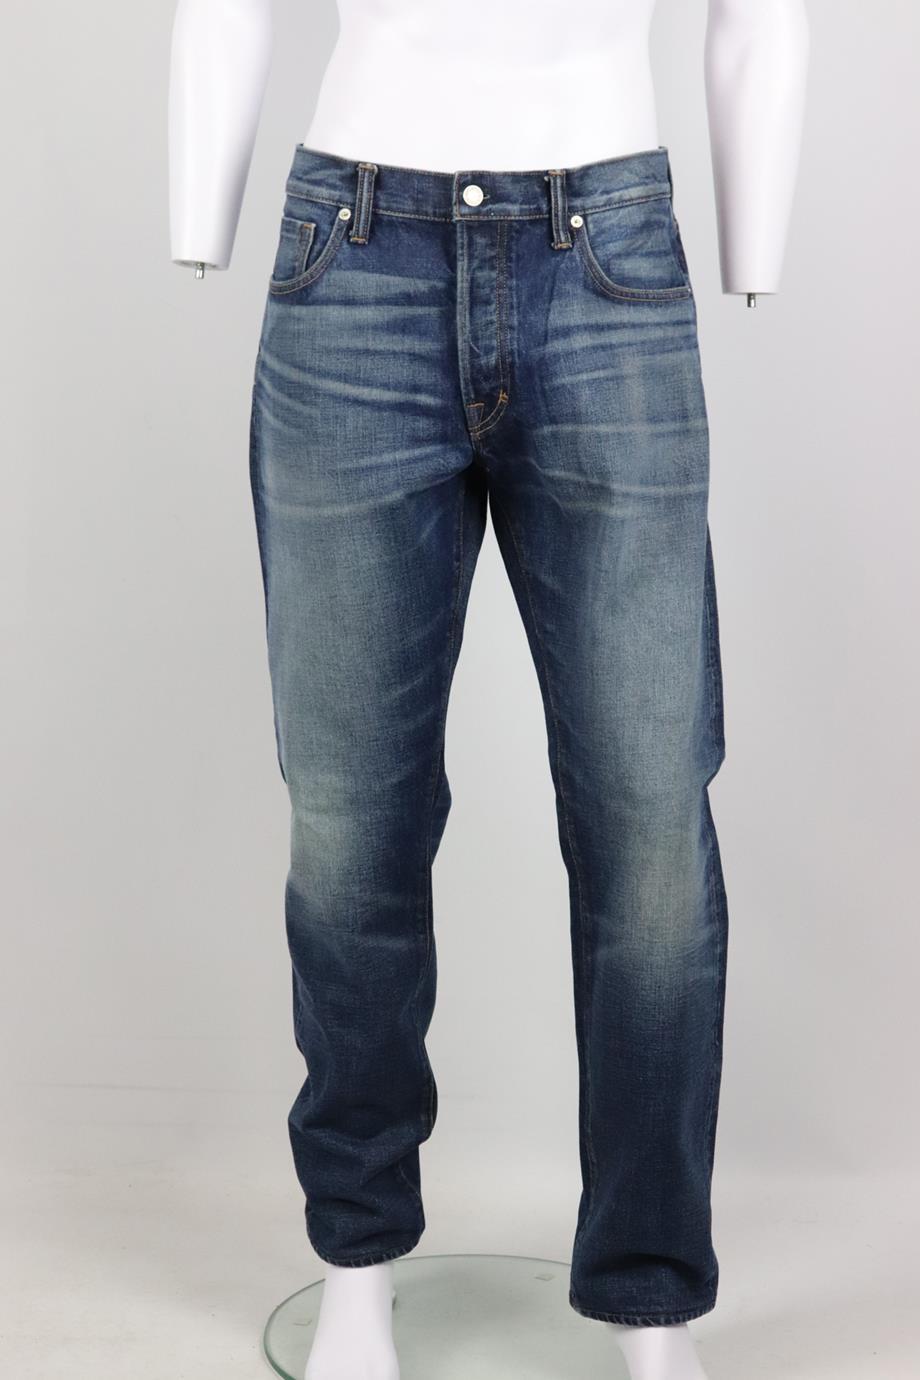 Tom Ford men's straight leg denim jeans. Blue. Button fastening at front. 100% Cotton. Size: UK/US Waist 34 (Large, IT 50). Waist: 35 in. Hips: 45 in. Length: 41 in. Inseam: 31.5 in. Rise: 11.5 in. Very good condition - No sign of wear; see pictures